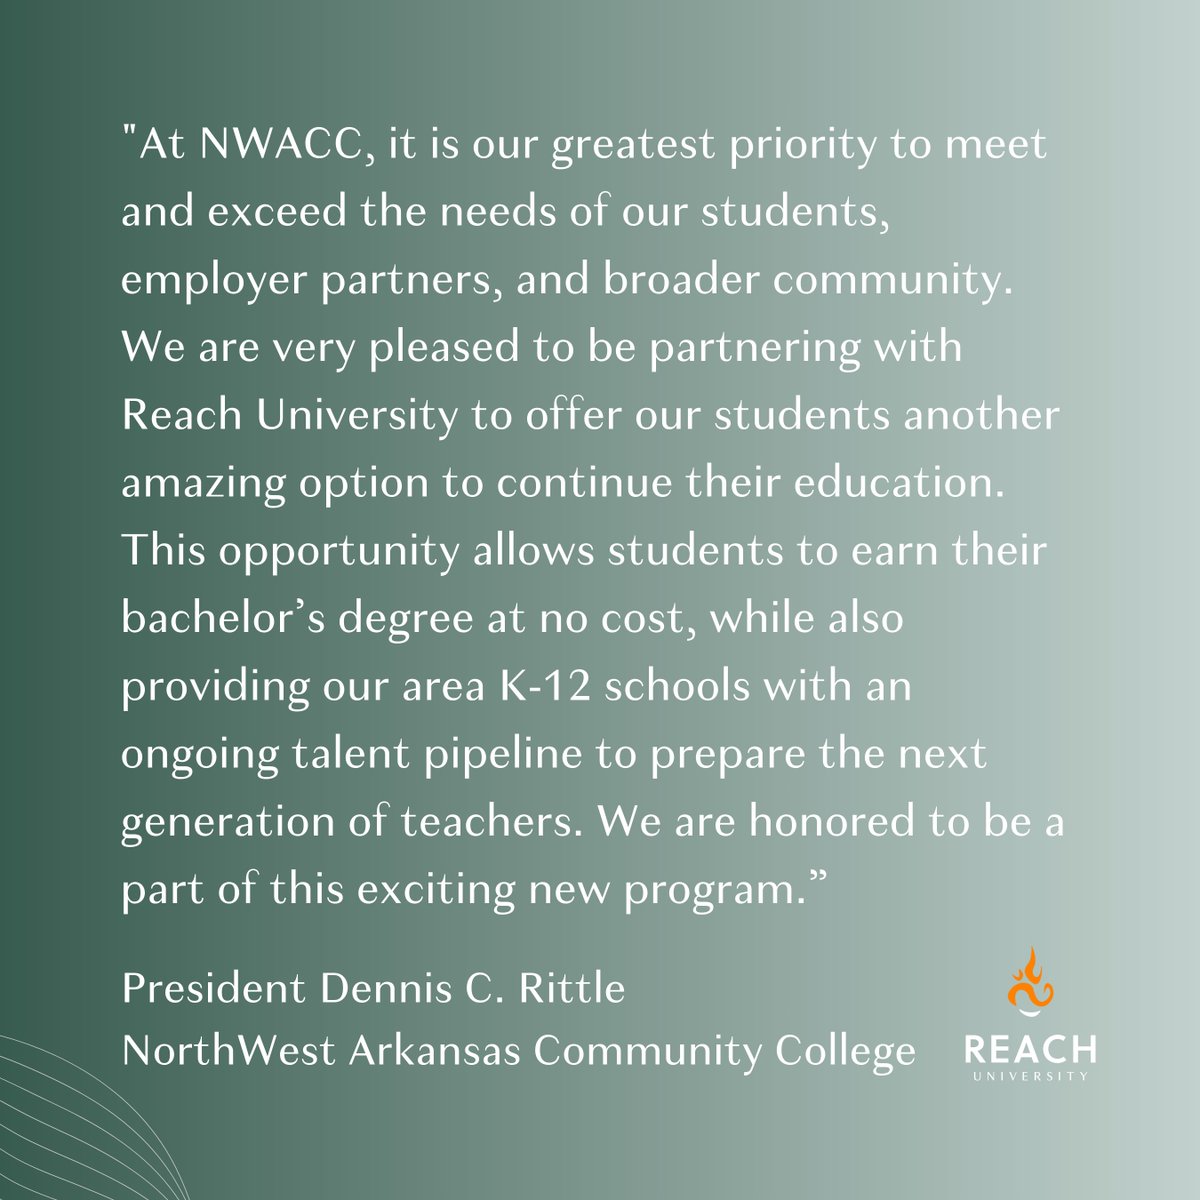 In '15, 10% of Arkansas community college students transferred + completed a bachelor’s degree within 6 years. As the state's largest #comm_college, @NWACC is leading the way in transferring 100% of associate credits into @ReachUniversity's paid, debt-free Liberal Studies B.A.